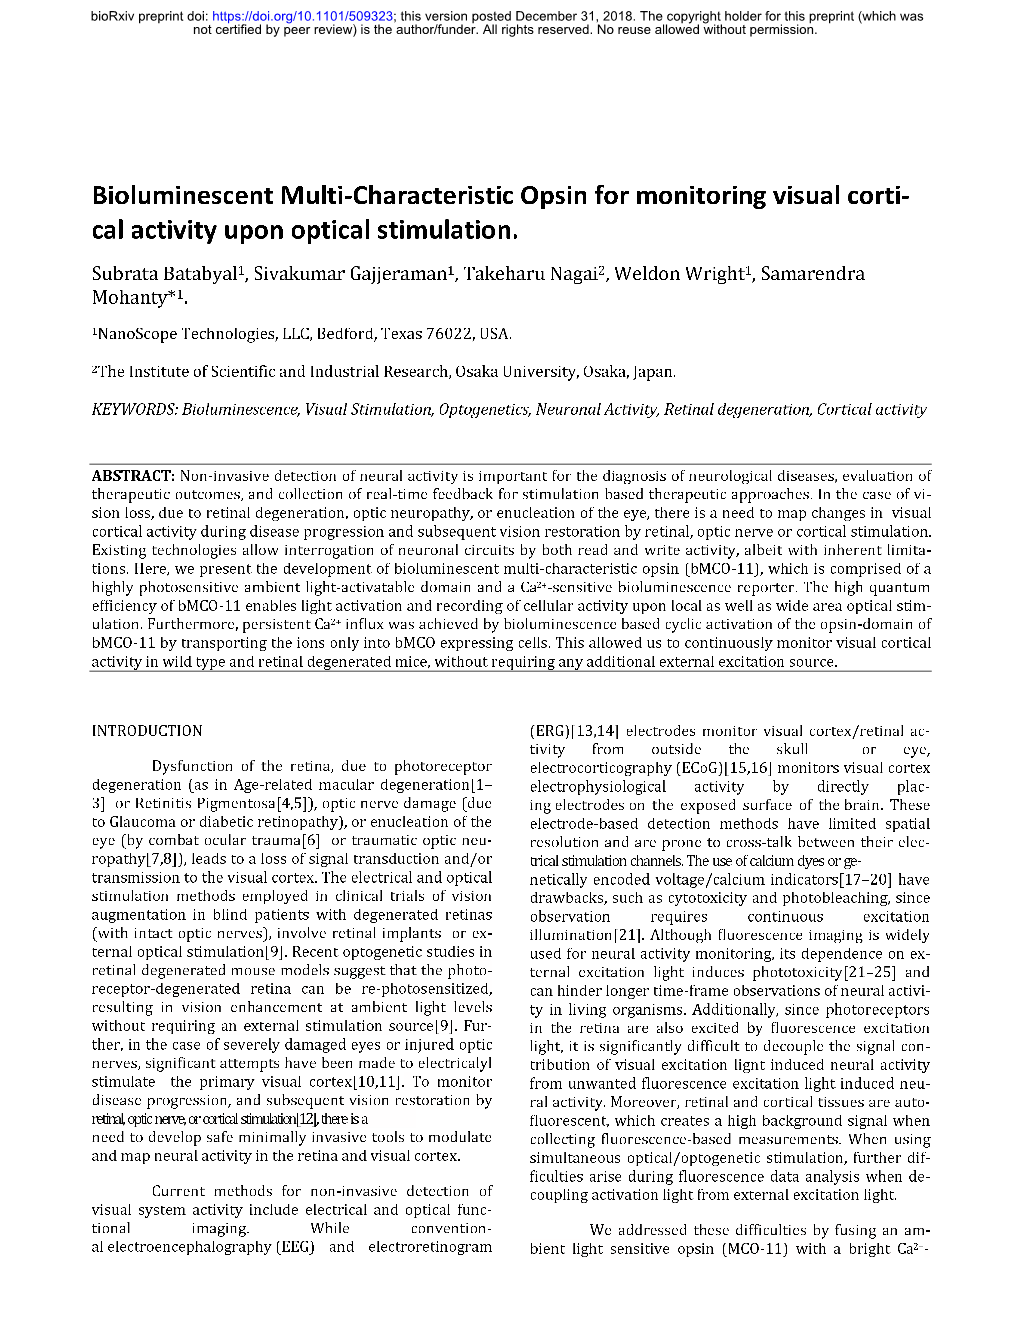 Bioluminescent Multi-Characteristic Opsin for Monitoring Visual Cortical